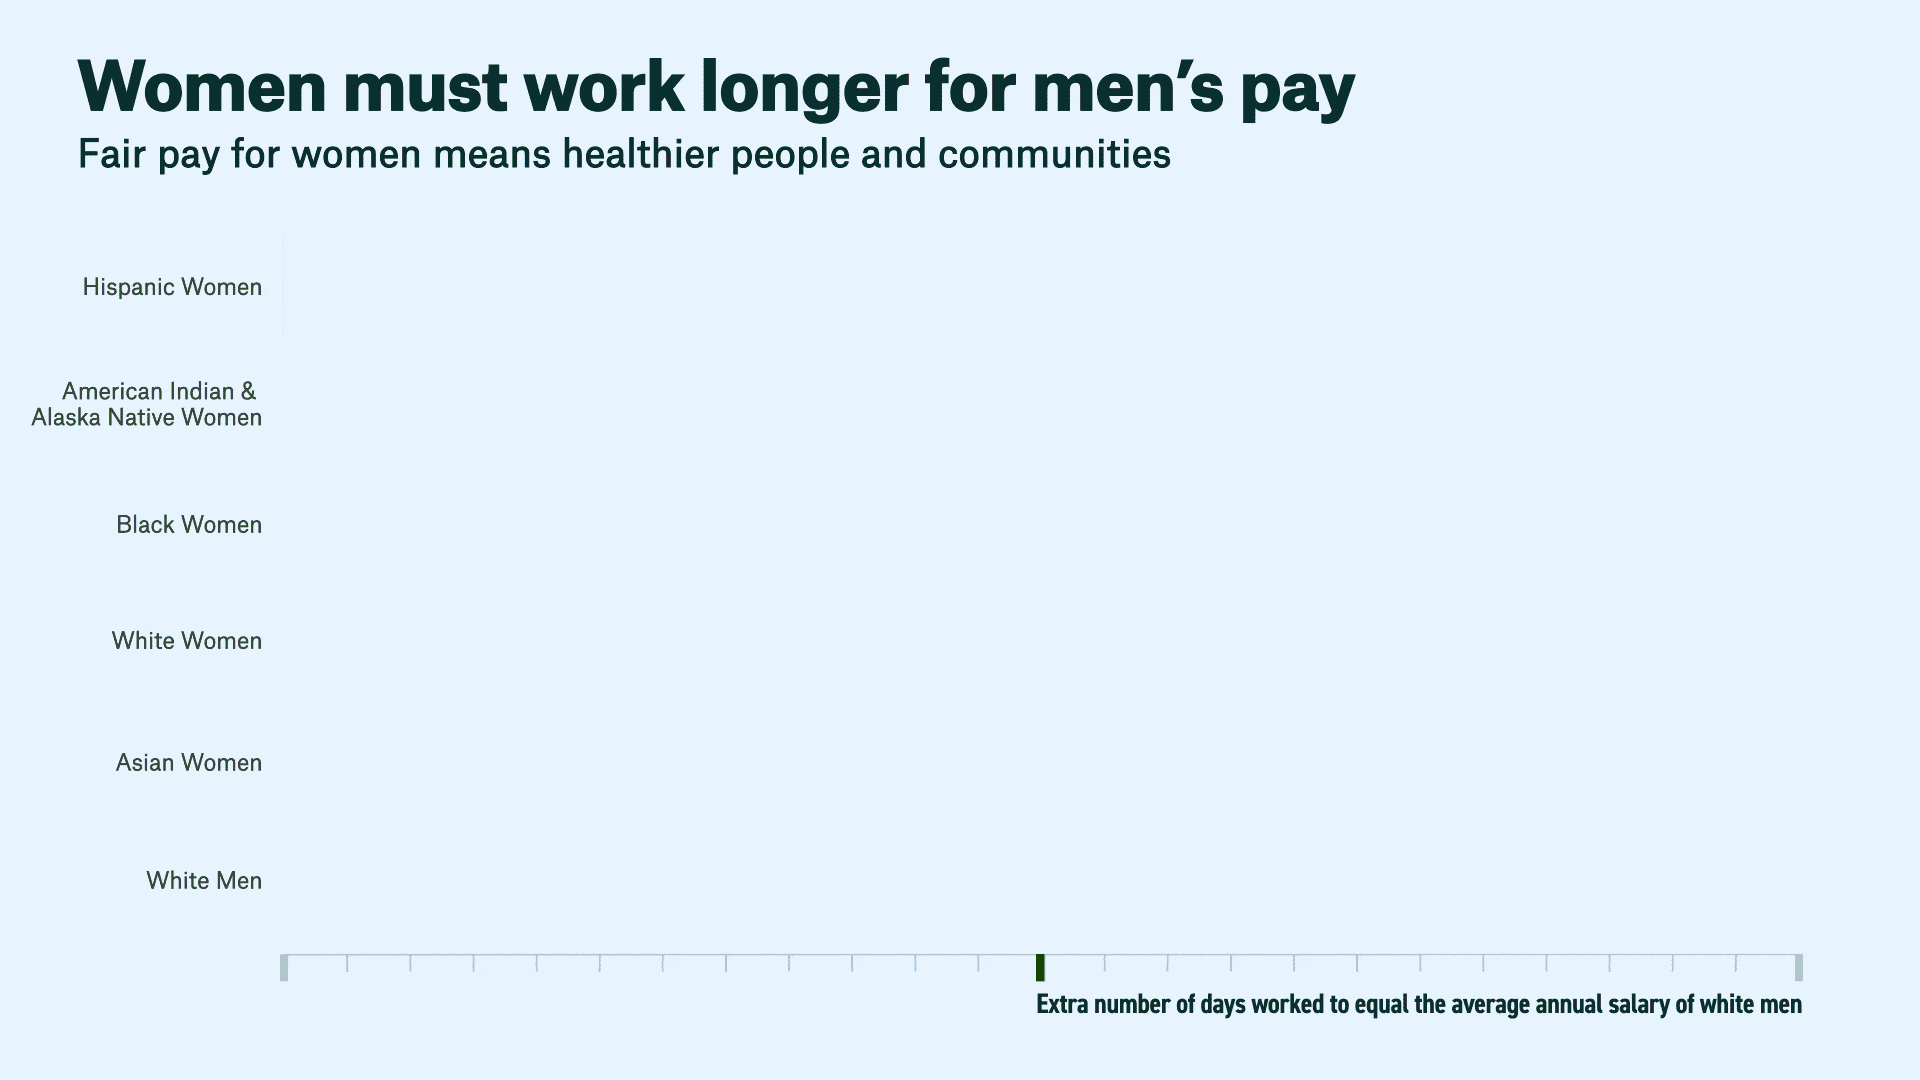 Moving bar chart showing how much longer women of different races must work to earn the same pay as men